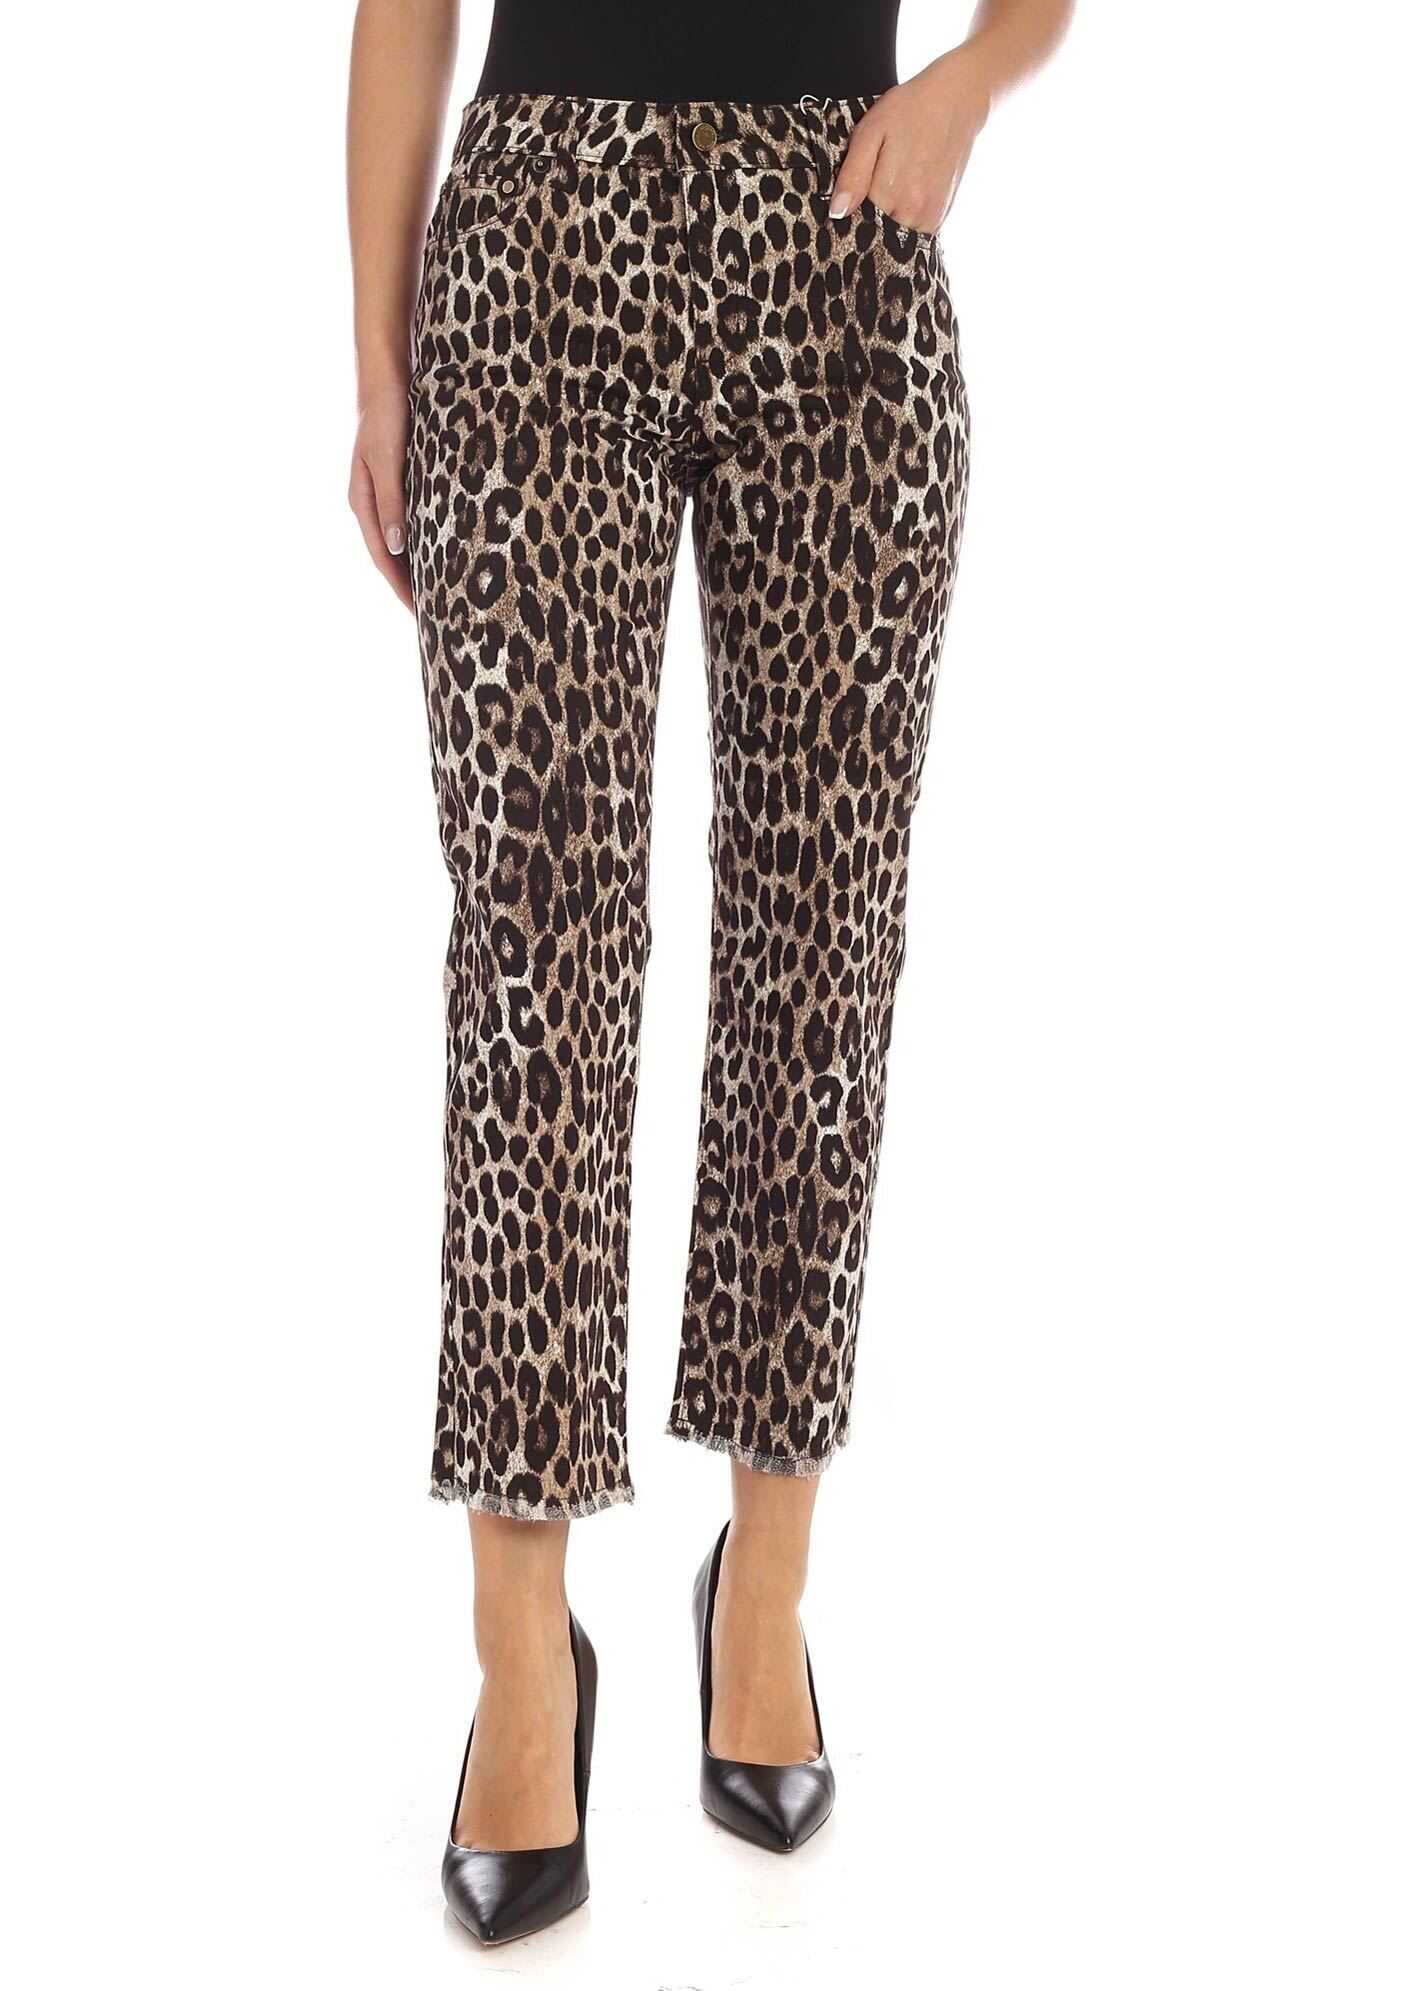 Michael Kors Animal Print Trousers In Shades Of Brown And Black Animal print